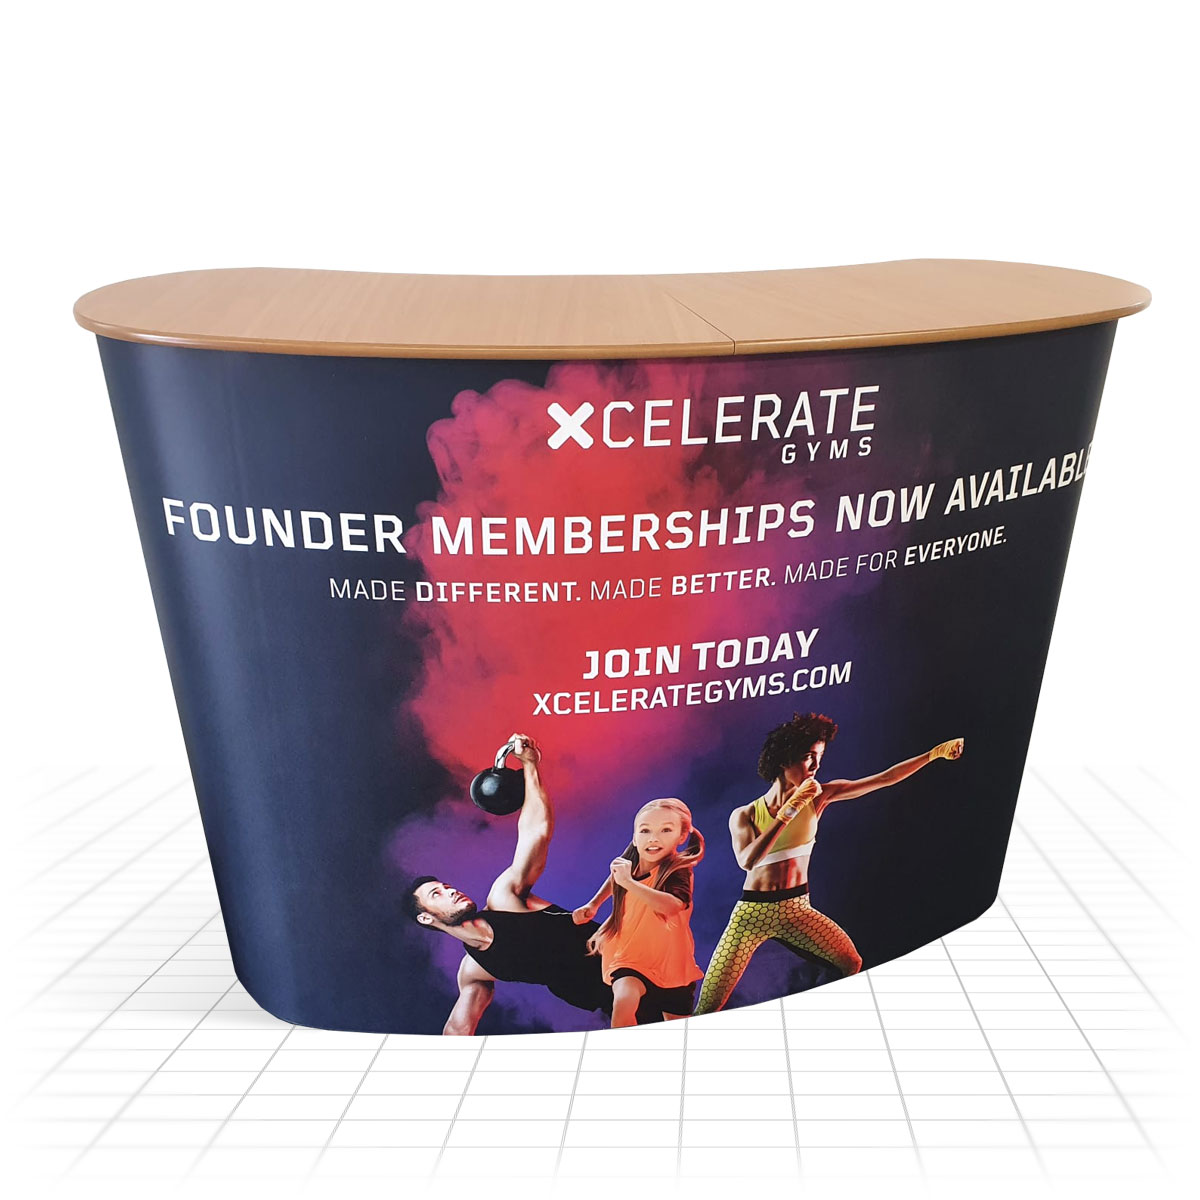 http://www.miragedisplay.co.uk/img/products/oversized/pop_up_counter_new_xcelerate.jpg